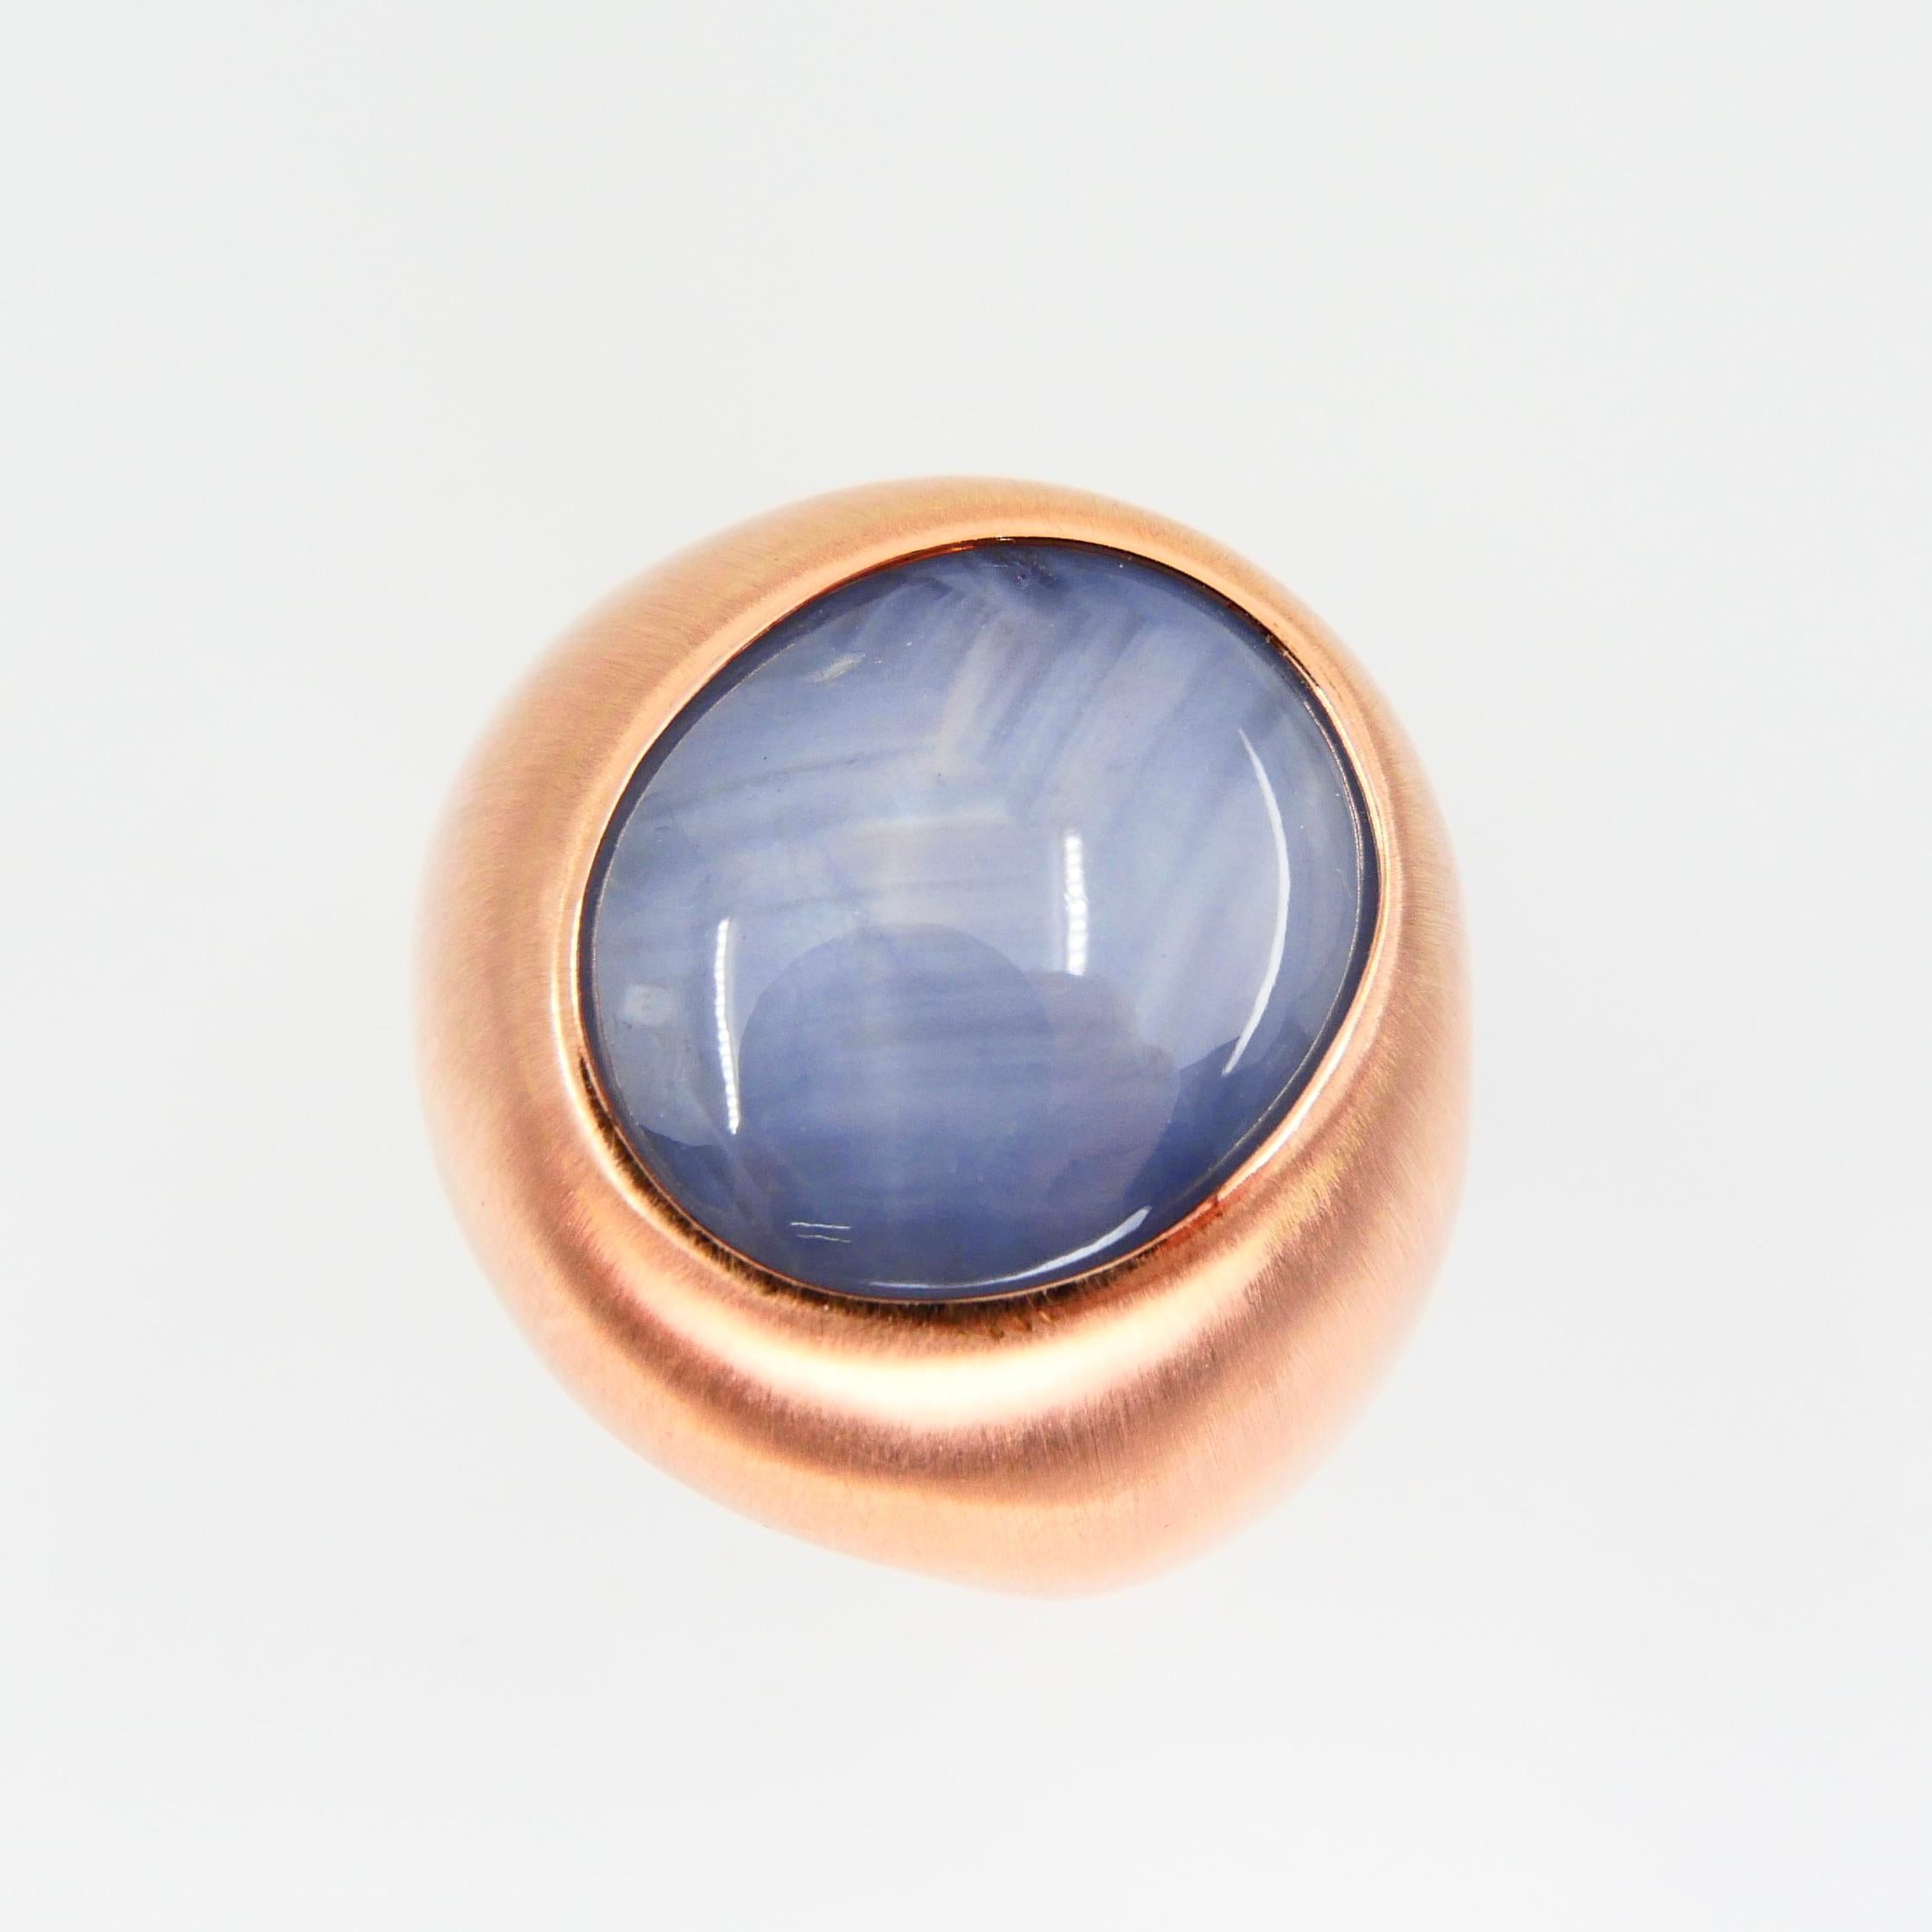 Certified Blue Star Sapphire 39.28 Carat Rose Gold Ring, Unisex, Strong Star 8